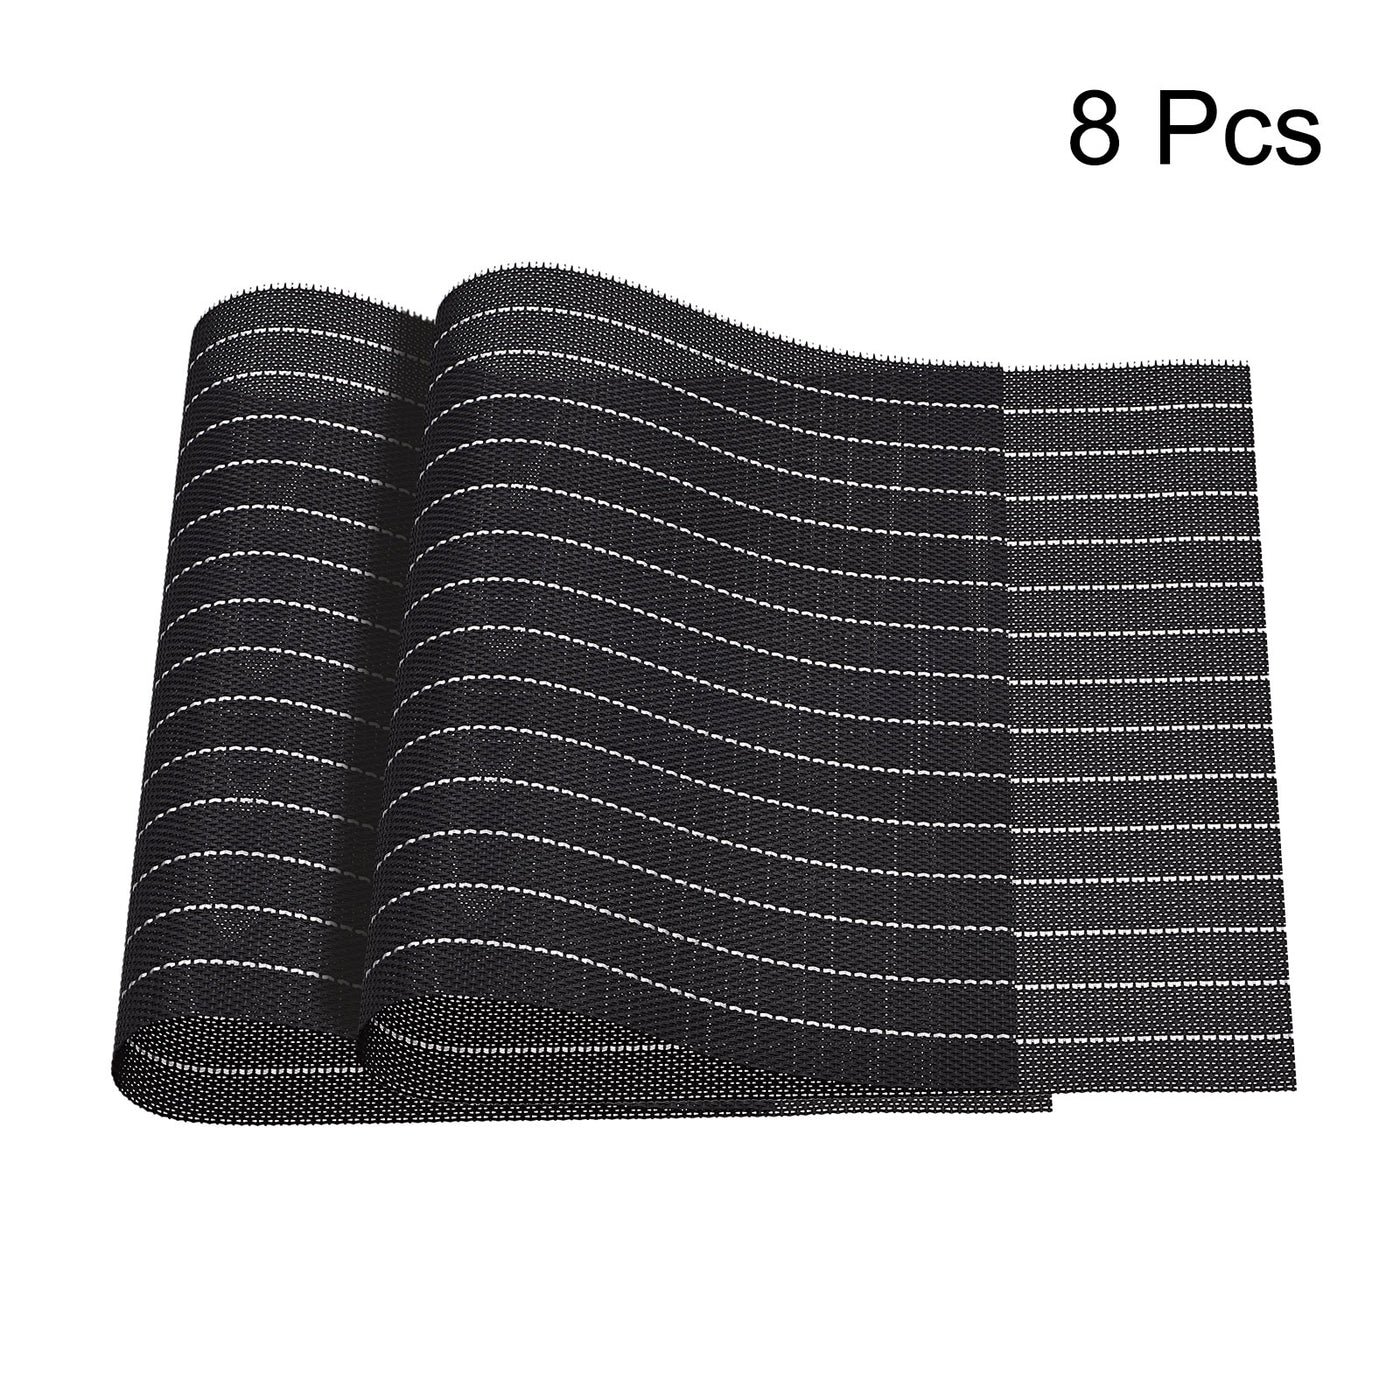 uxcell Uxcell Place Mats, 450x300mm Table Mats Set of 8 PVC Washable Woven Placemat Black